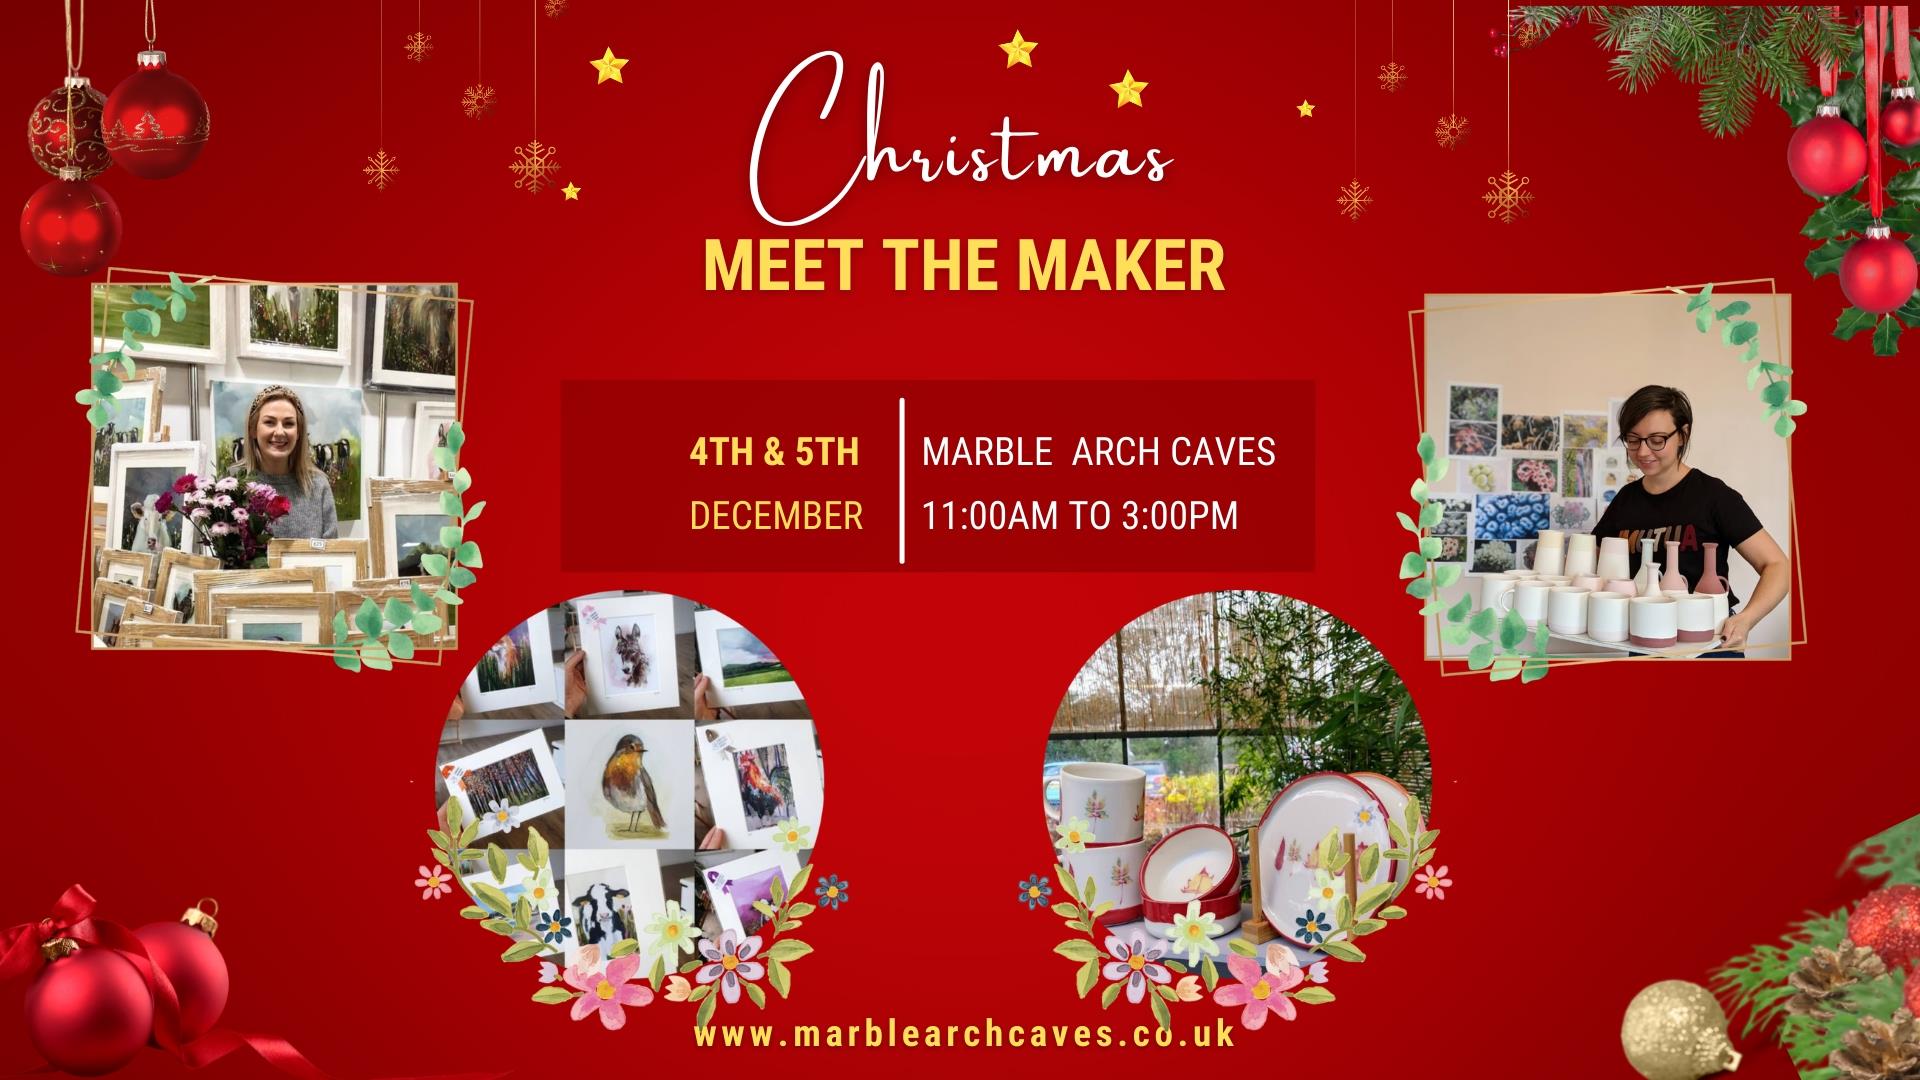 Christmas Meet the Maker at Marble Arch Caves